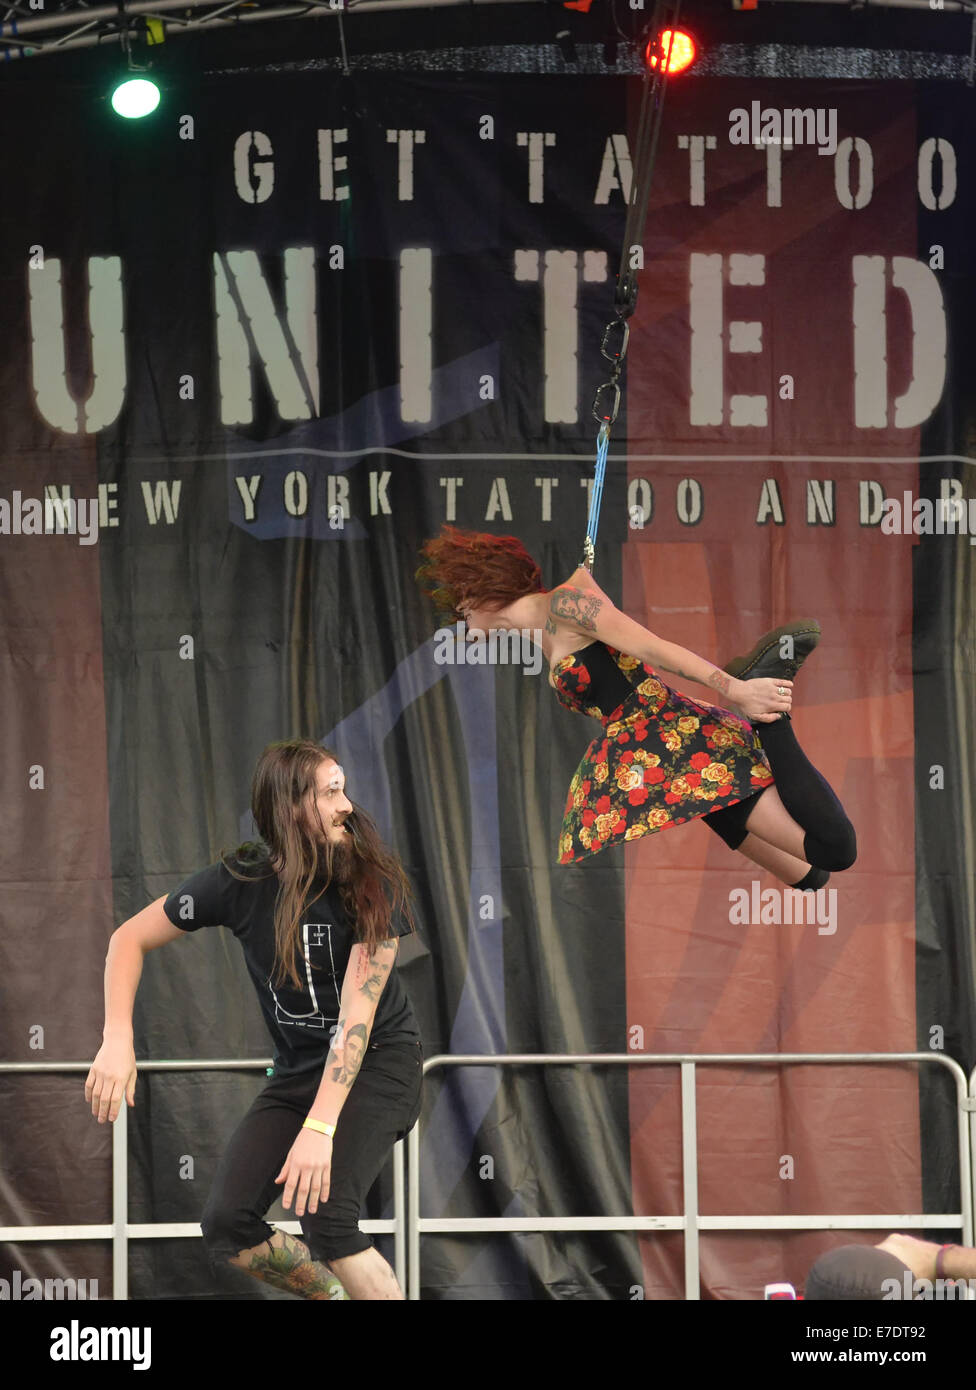 Garden City, New York, USA. 14th Sep, 2014. Young woman with tattoos is suspended from two ropes with hooks pierced through the skin of his back, at an outdoor body suspension show at the United Ink Flight 914 tattoo convention at the Cradle of Aviation museum of Long Island. Credit:  Ann Parry/ZUMA Wire/Alamy Live News Stock Photo